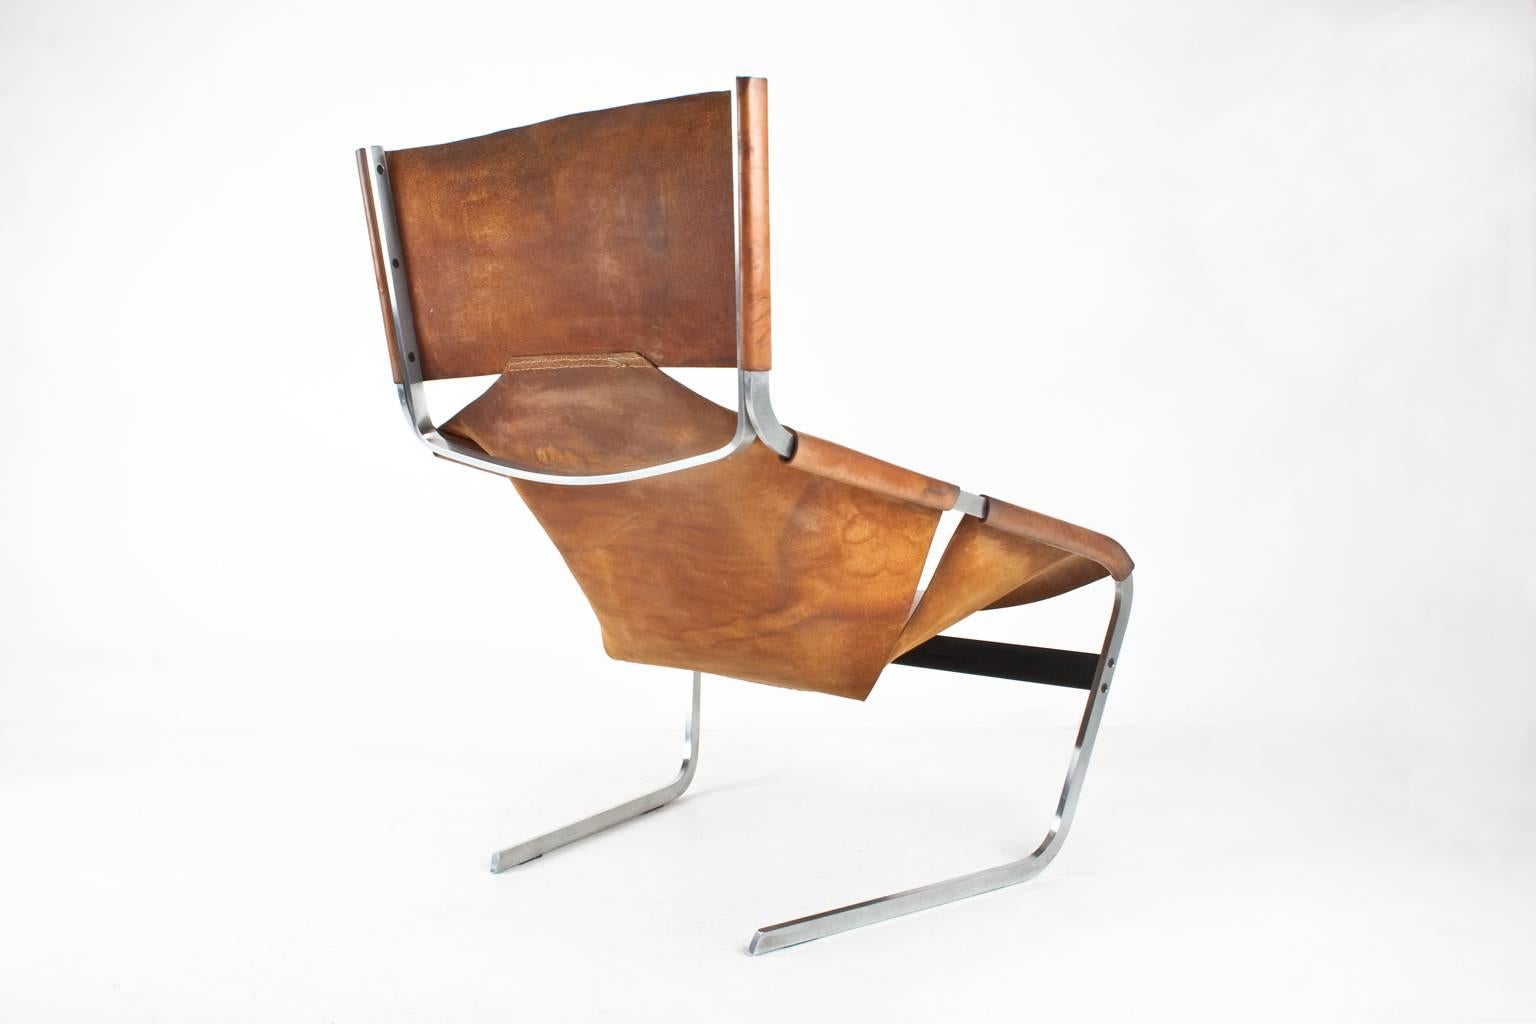 Original Pierre Paulin F444 lounge chair. A beautiful piece. The F444, later also known as F644, is designed by Pierre Paulin for Artifort in 1963. It’s one of his classic furniture designs. The original natural brown saddle leather has colored